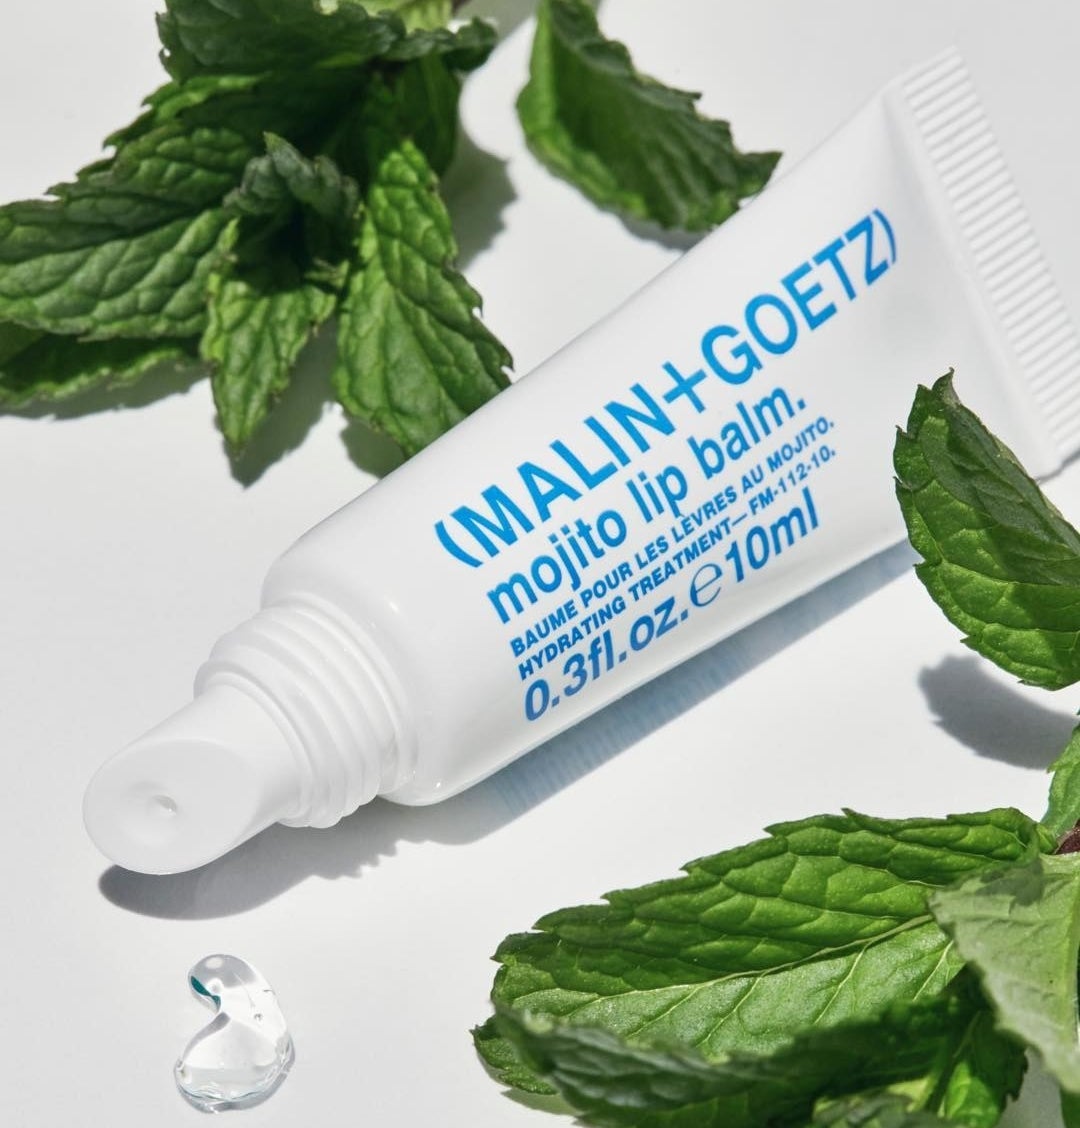 The lip balm surrounded by mint leaves